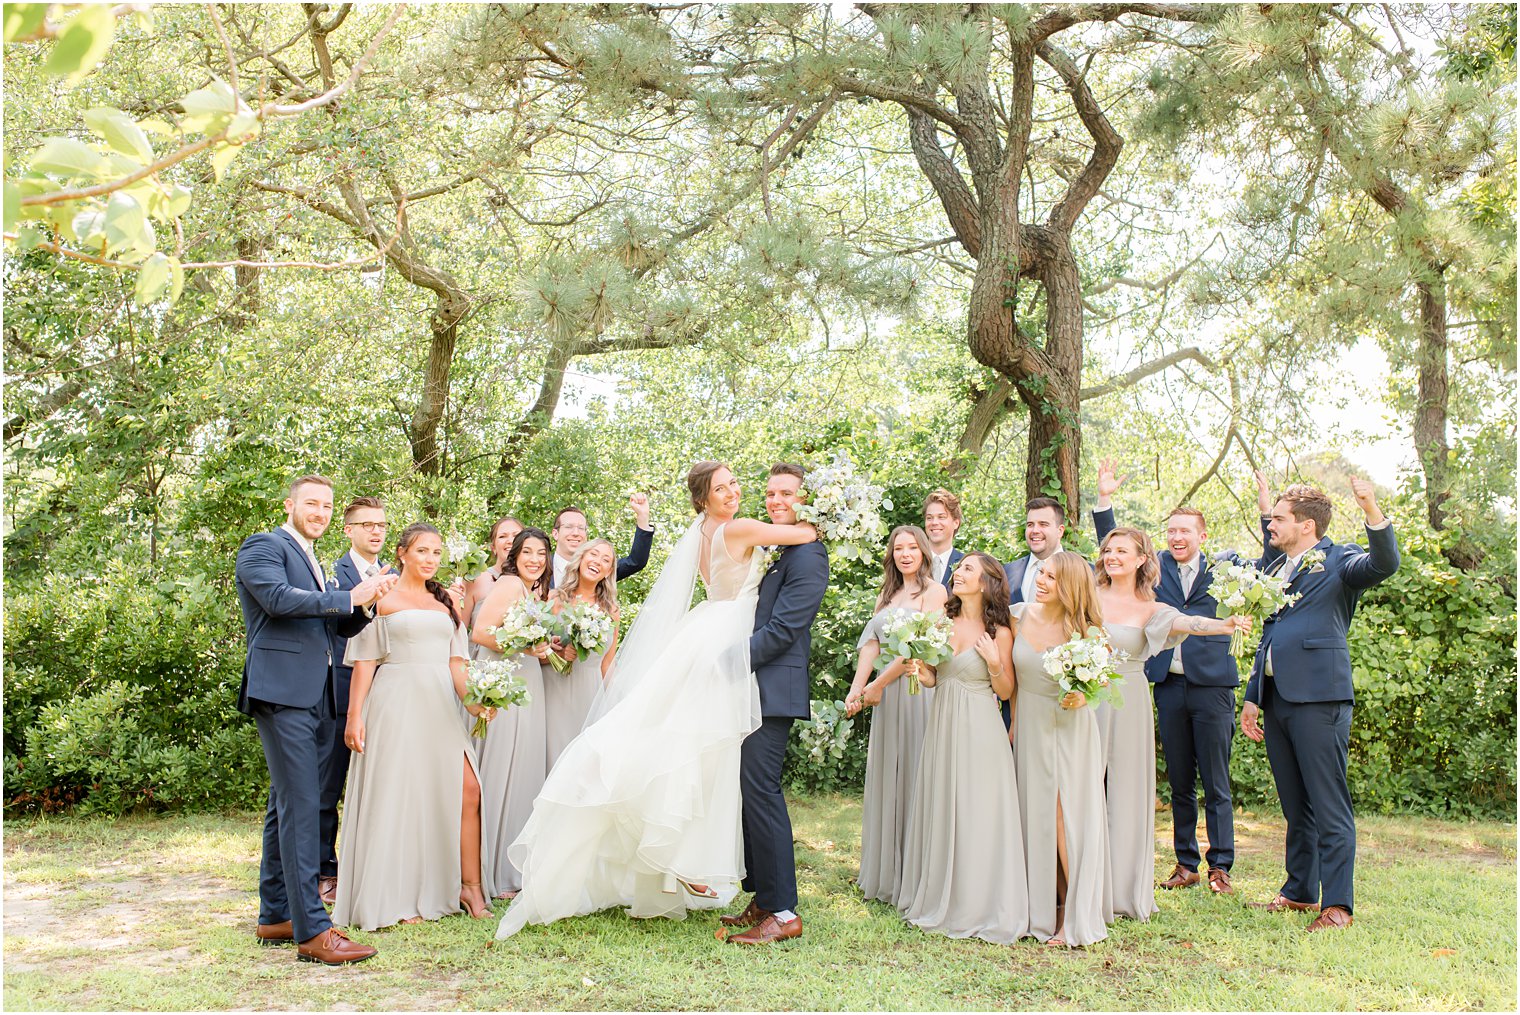 groom lifts up bride during photos with wedding party in NJ park